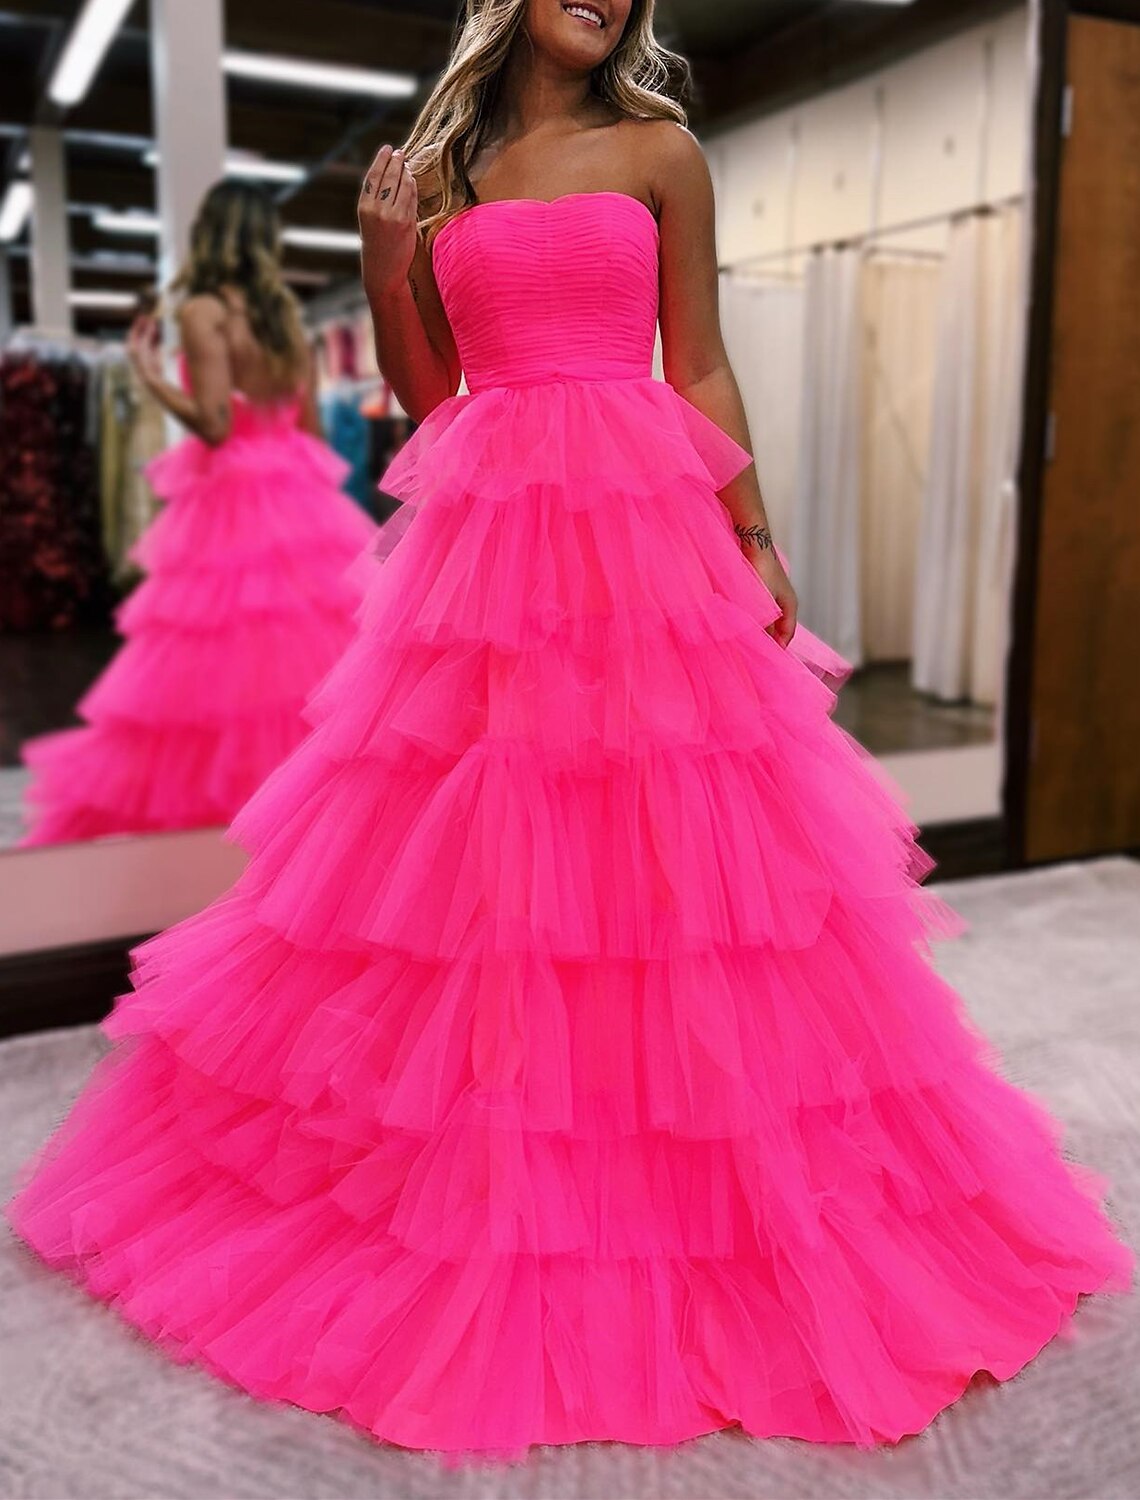 Ball Gown Prom Dresses Backless Dress Formal Wedding Guest Floor Length Sleeveless Strapless Tulle with Ruched